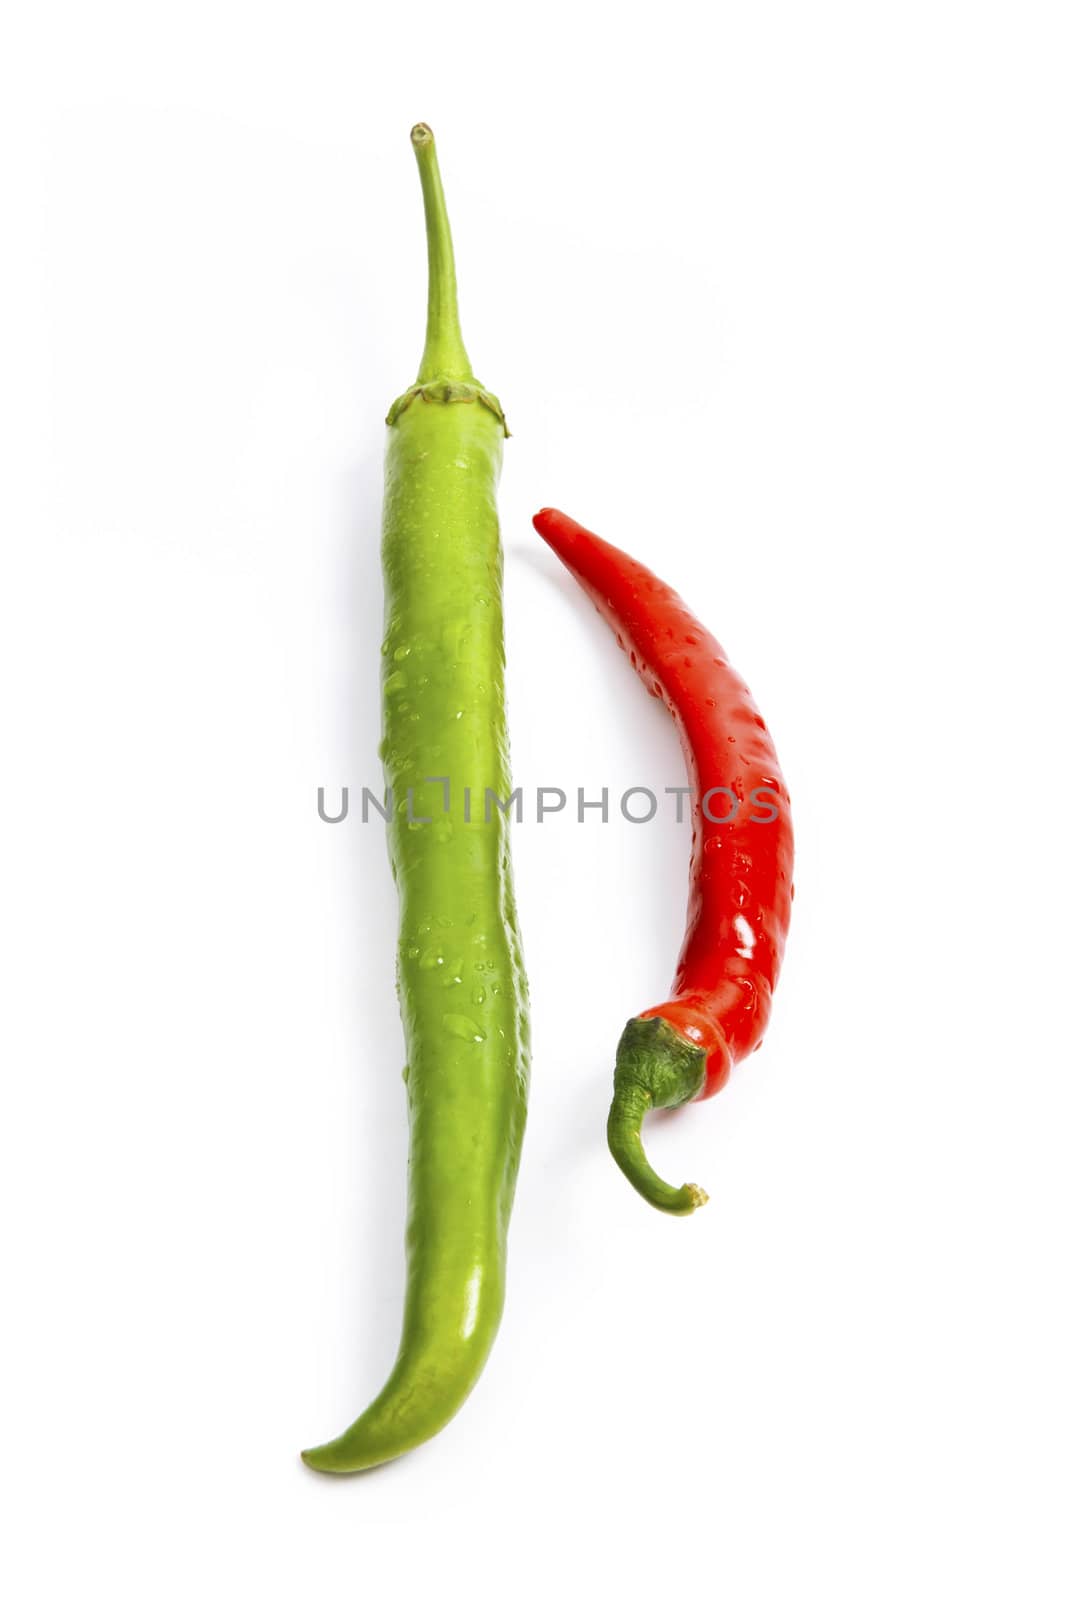 Red and green chili pepper composition isolated on white